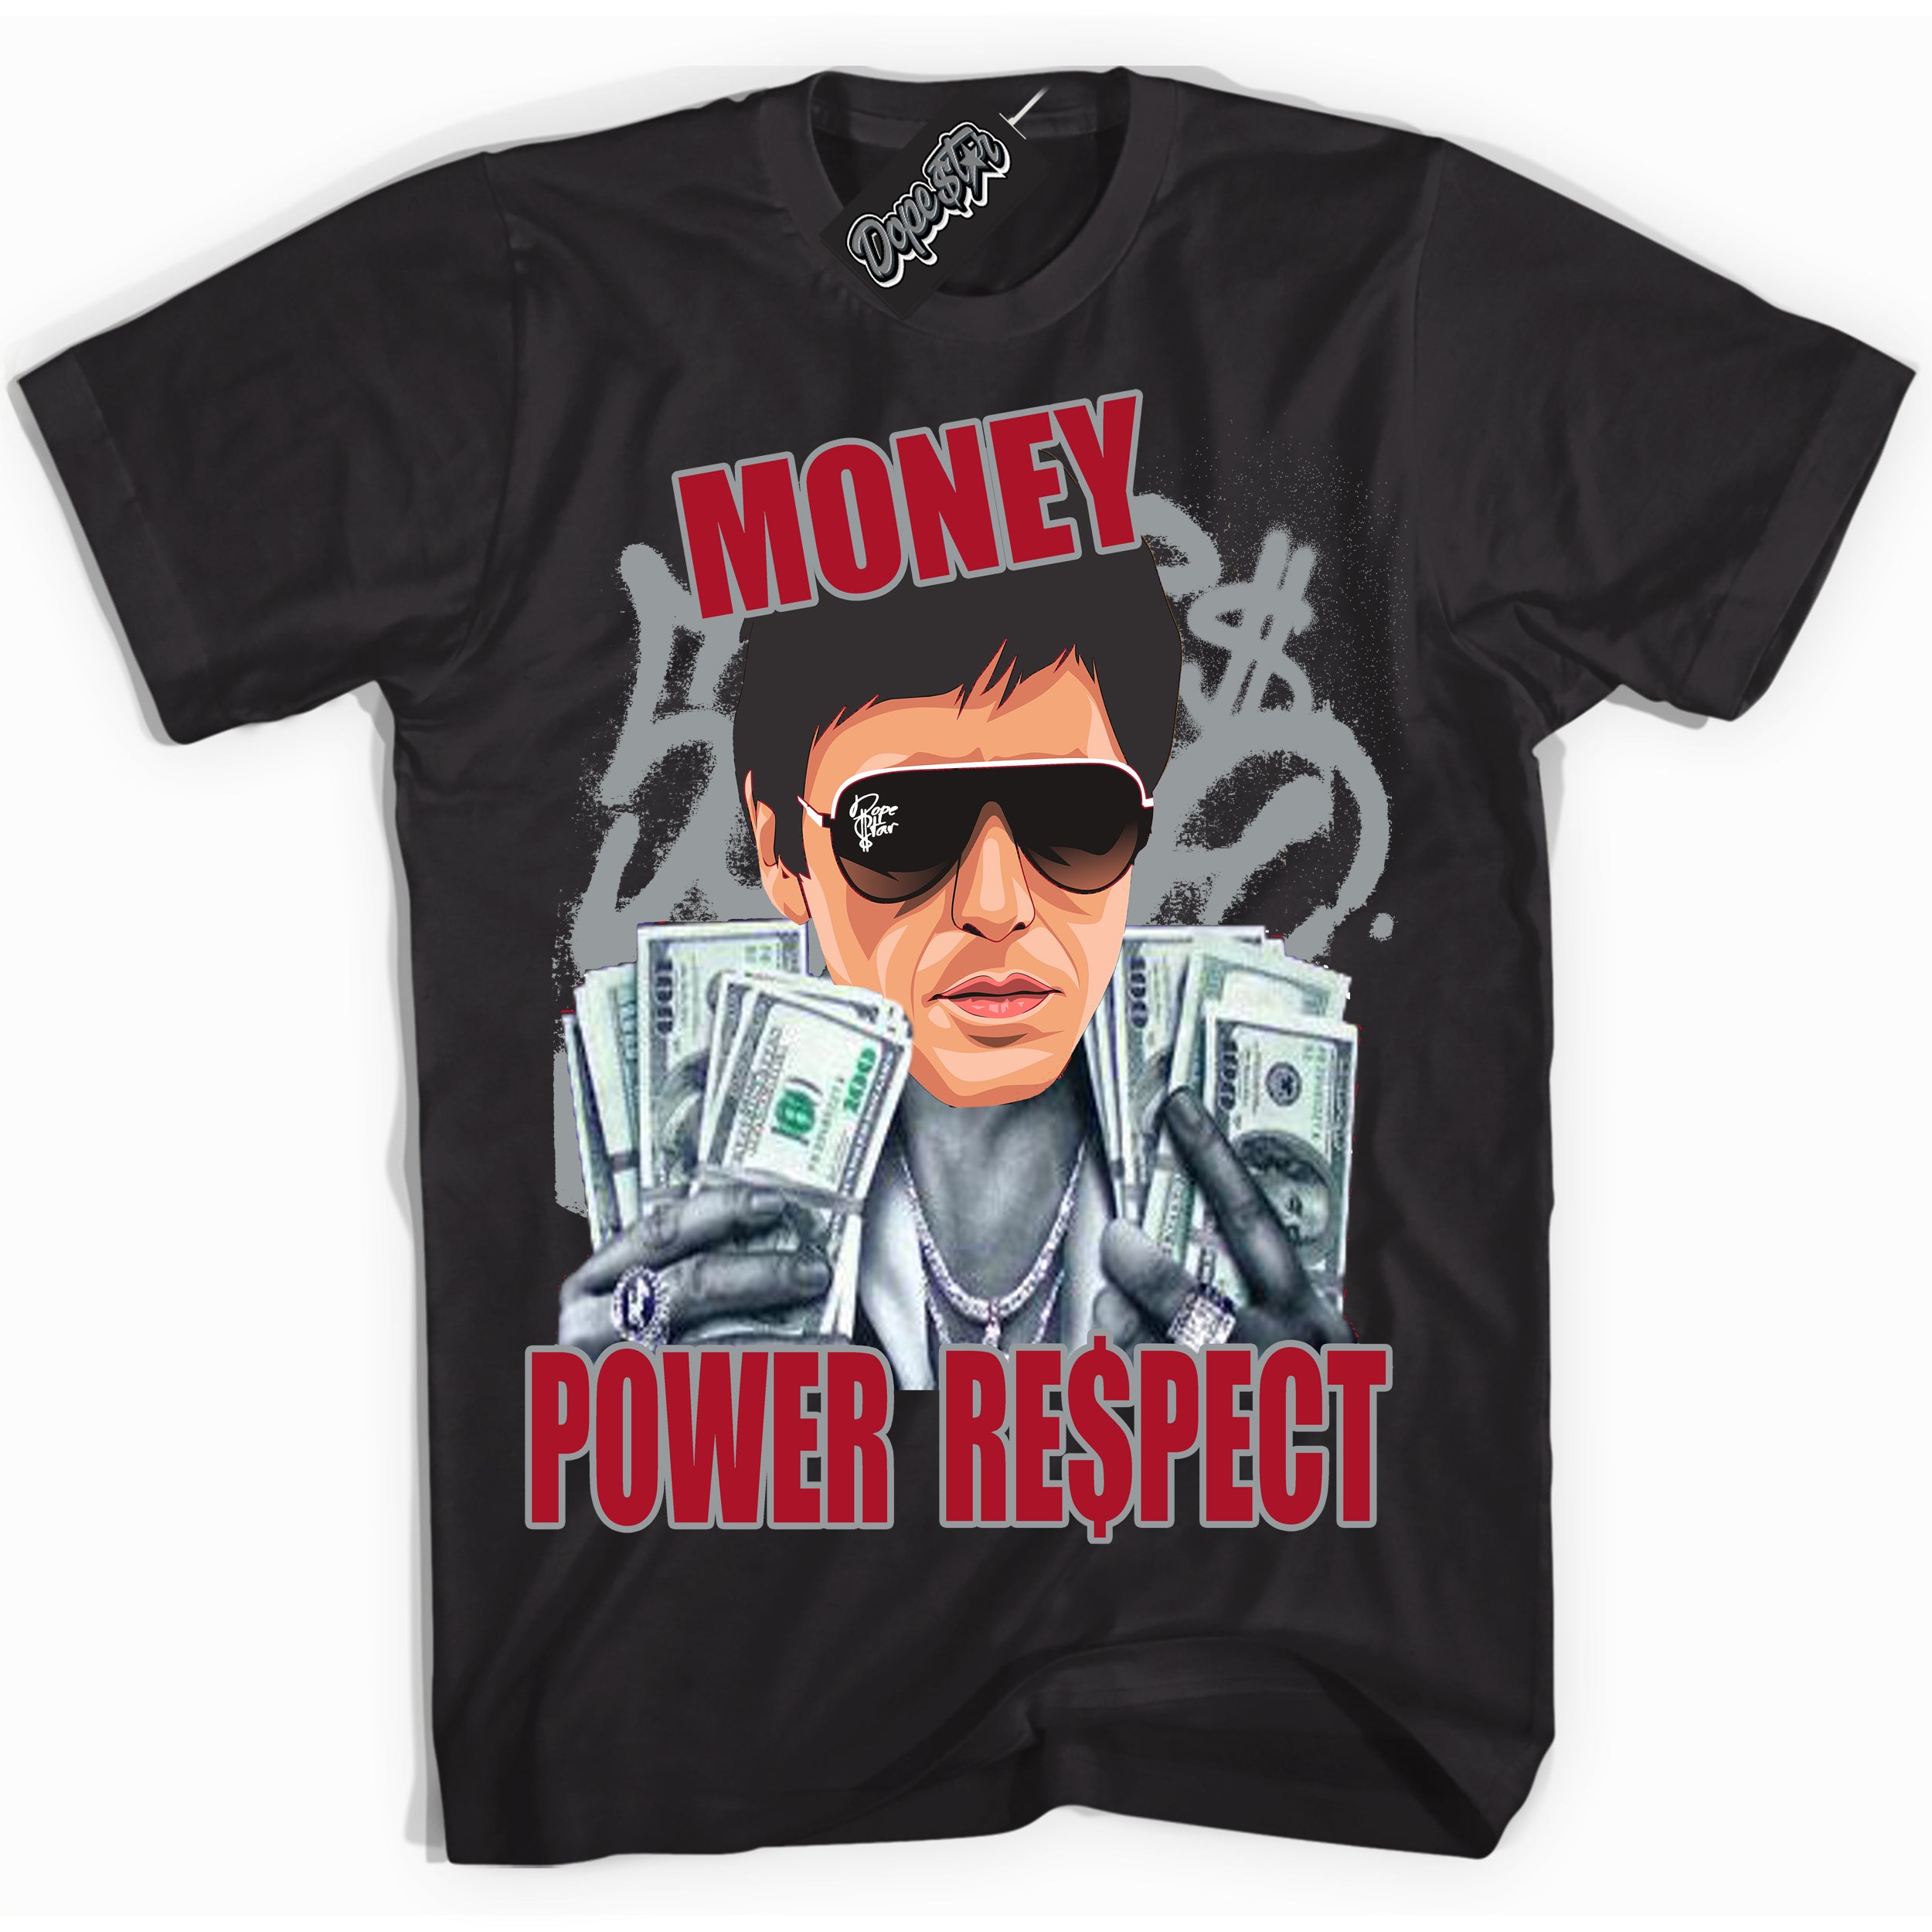 Cool Black Shirt with “ Tony Montana ” design that perfectly matches Reverse Ultraman Sneakers.